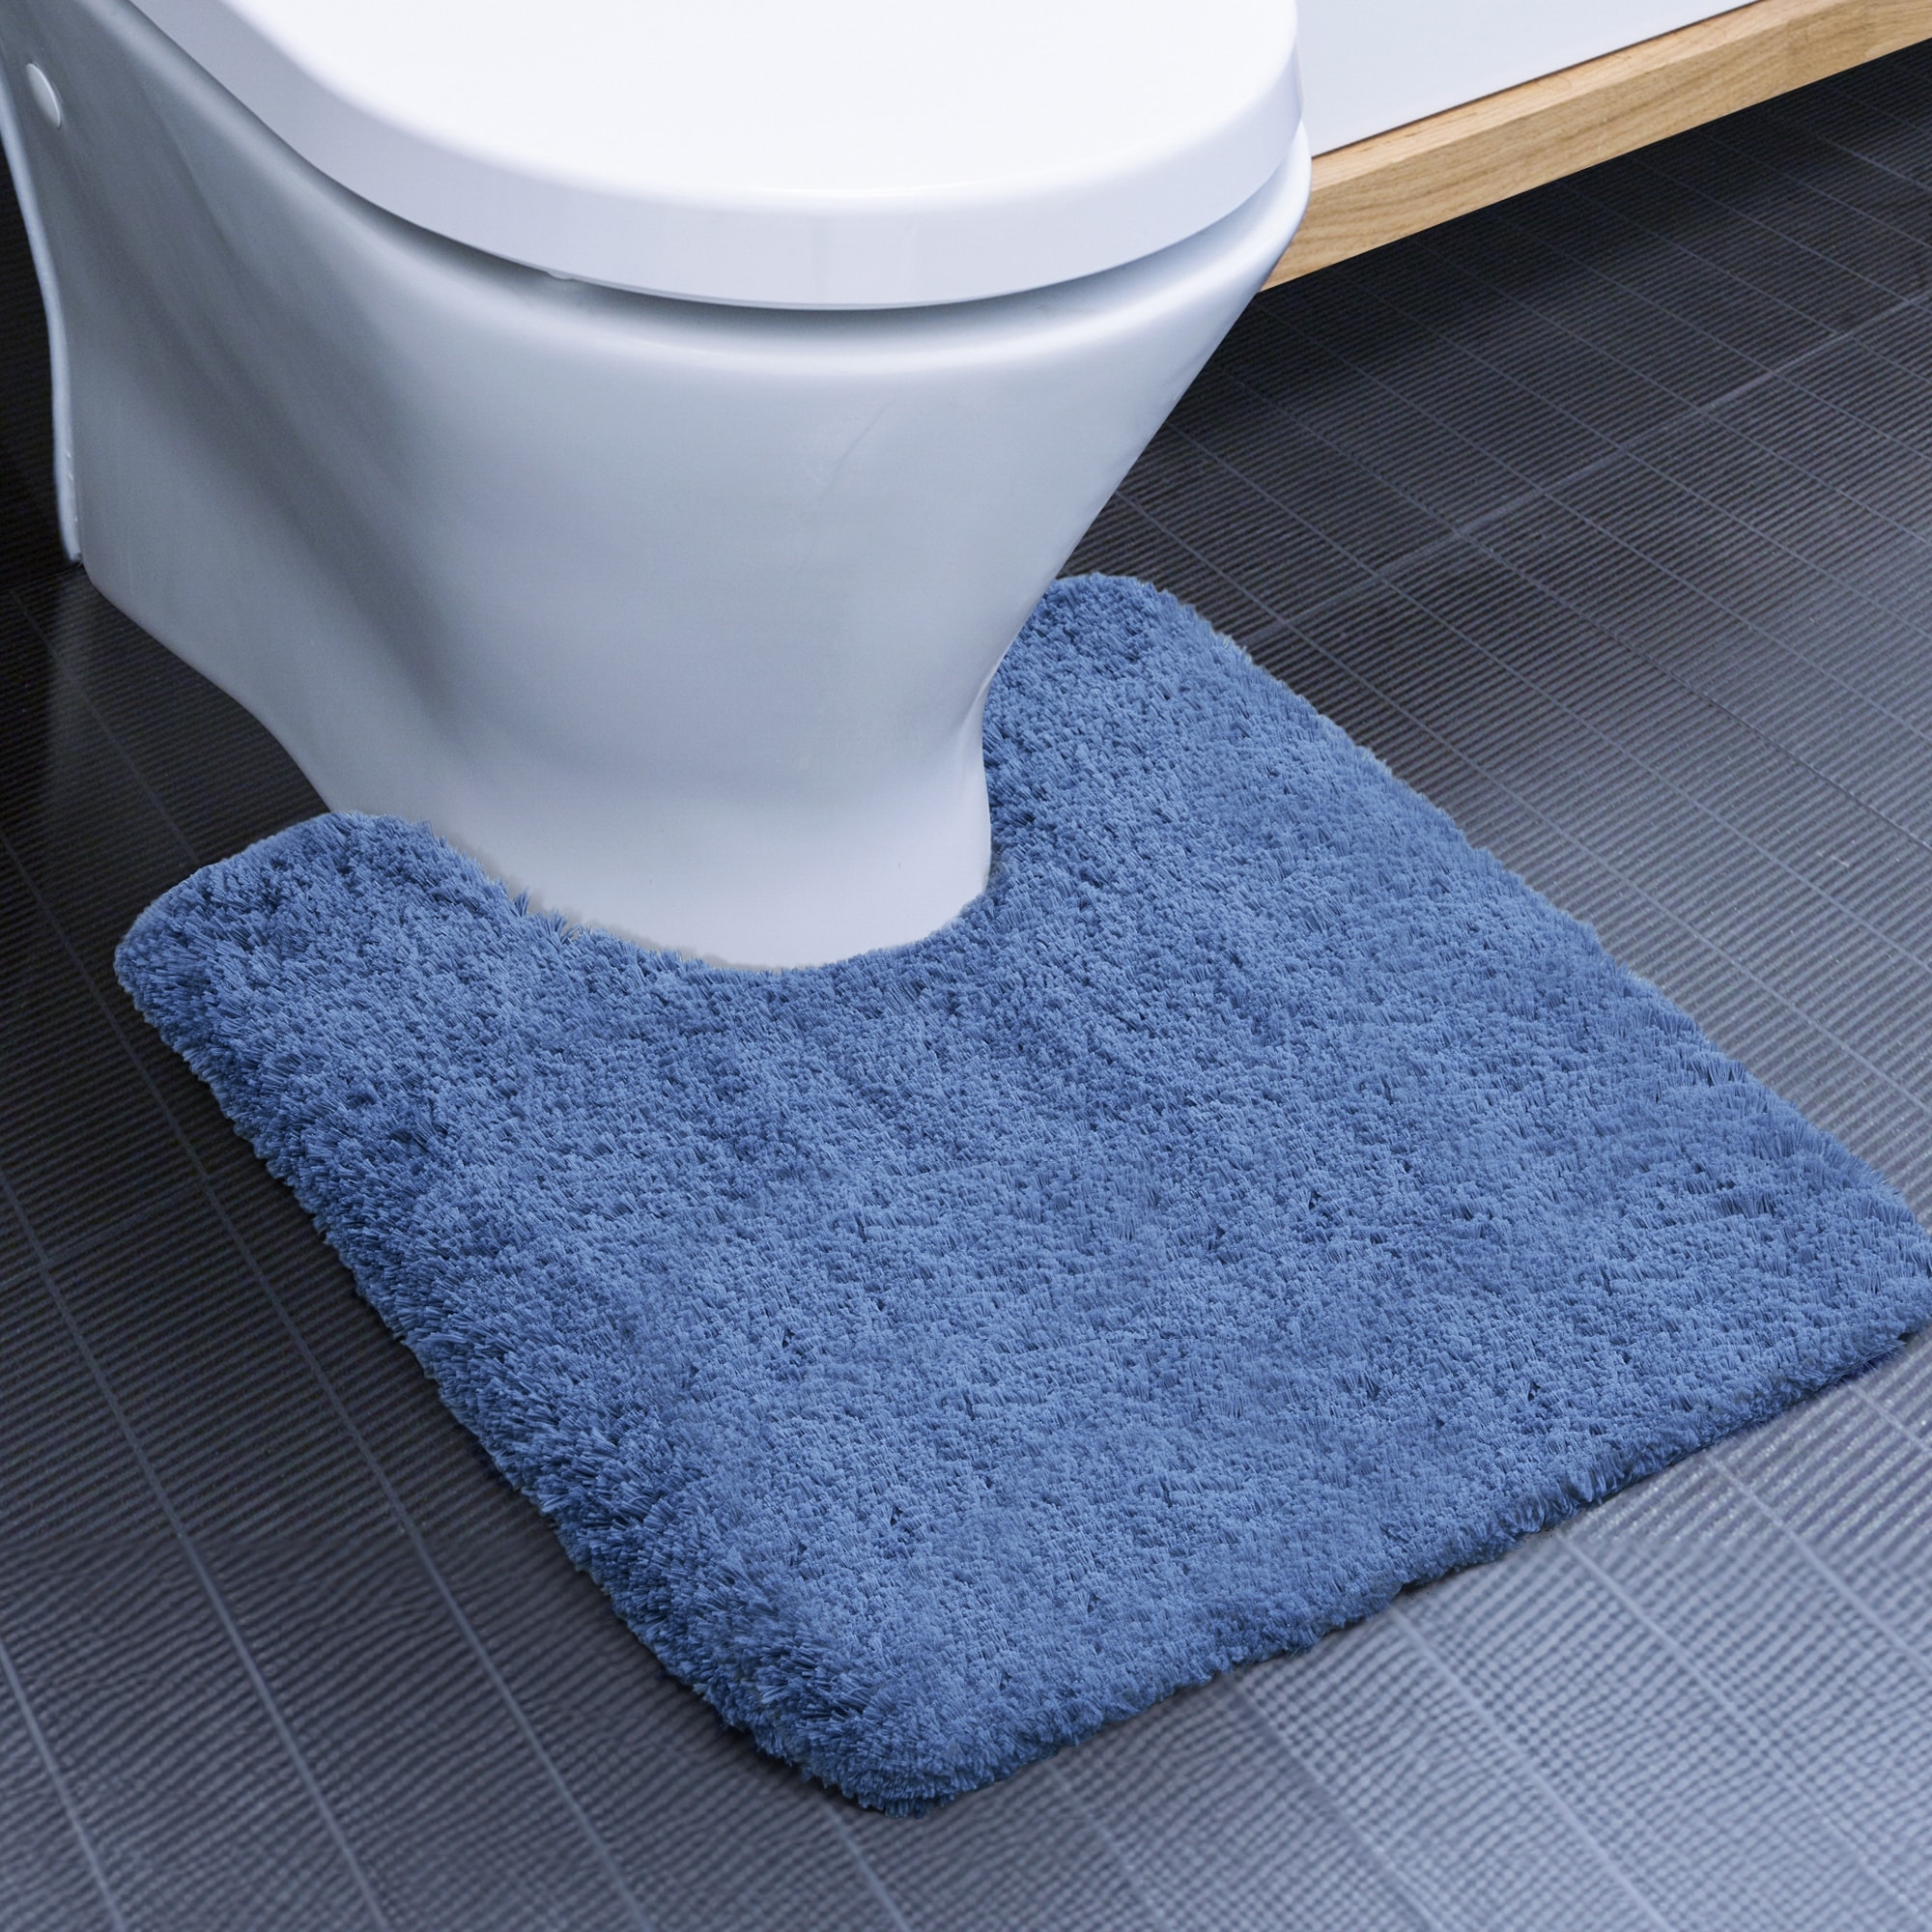 https://ak1.ostkcdn.com/images/products/is/images/direct/95aaf0efbe8deaade2148616ae19da01191b5718/Deconovo-Super-Absorbent-%26-Thick-Plush-Bath-Mat-Rugs-%281-PC%29.jpg